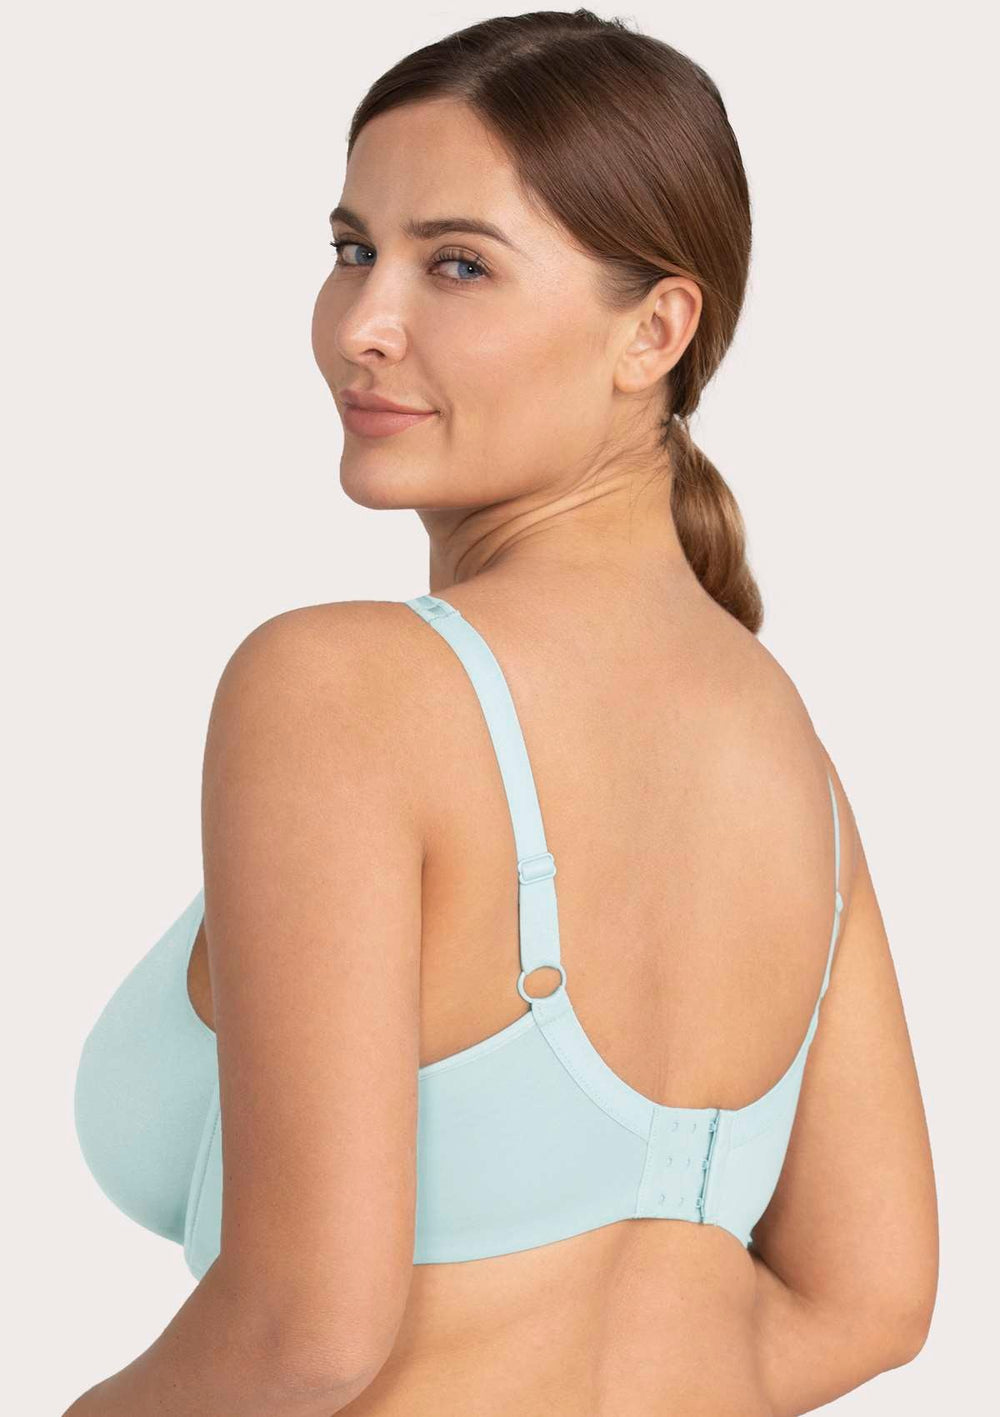  HSIA Minimizer Bras For Women Full Coverage,Unlined